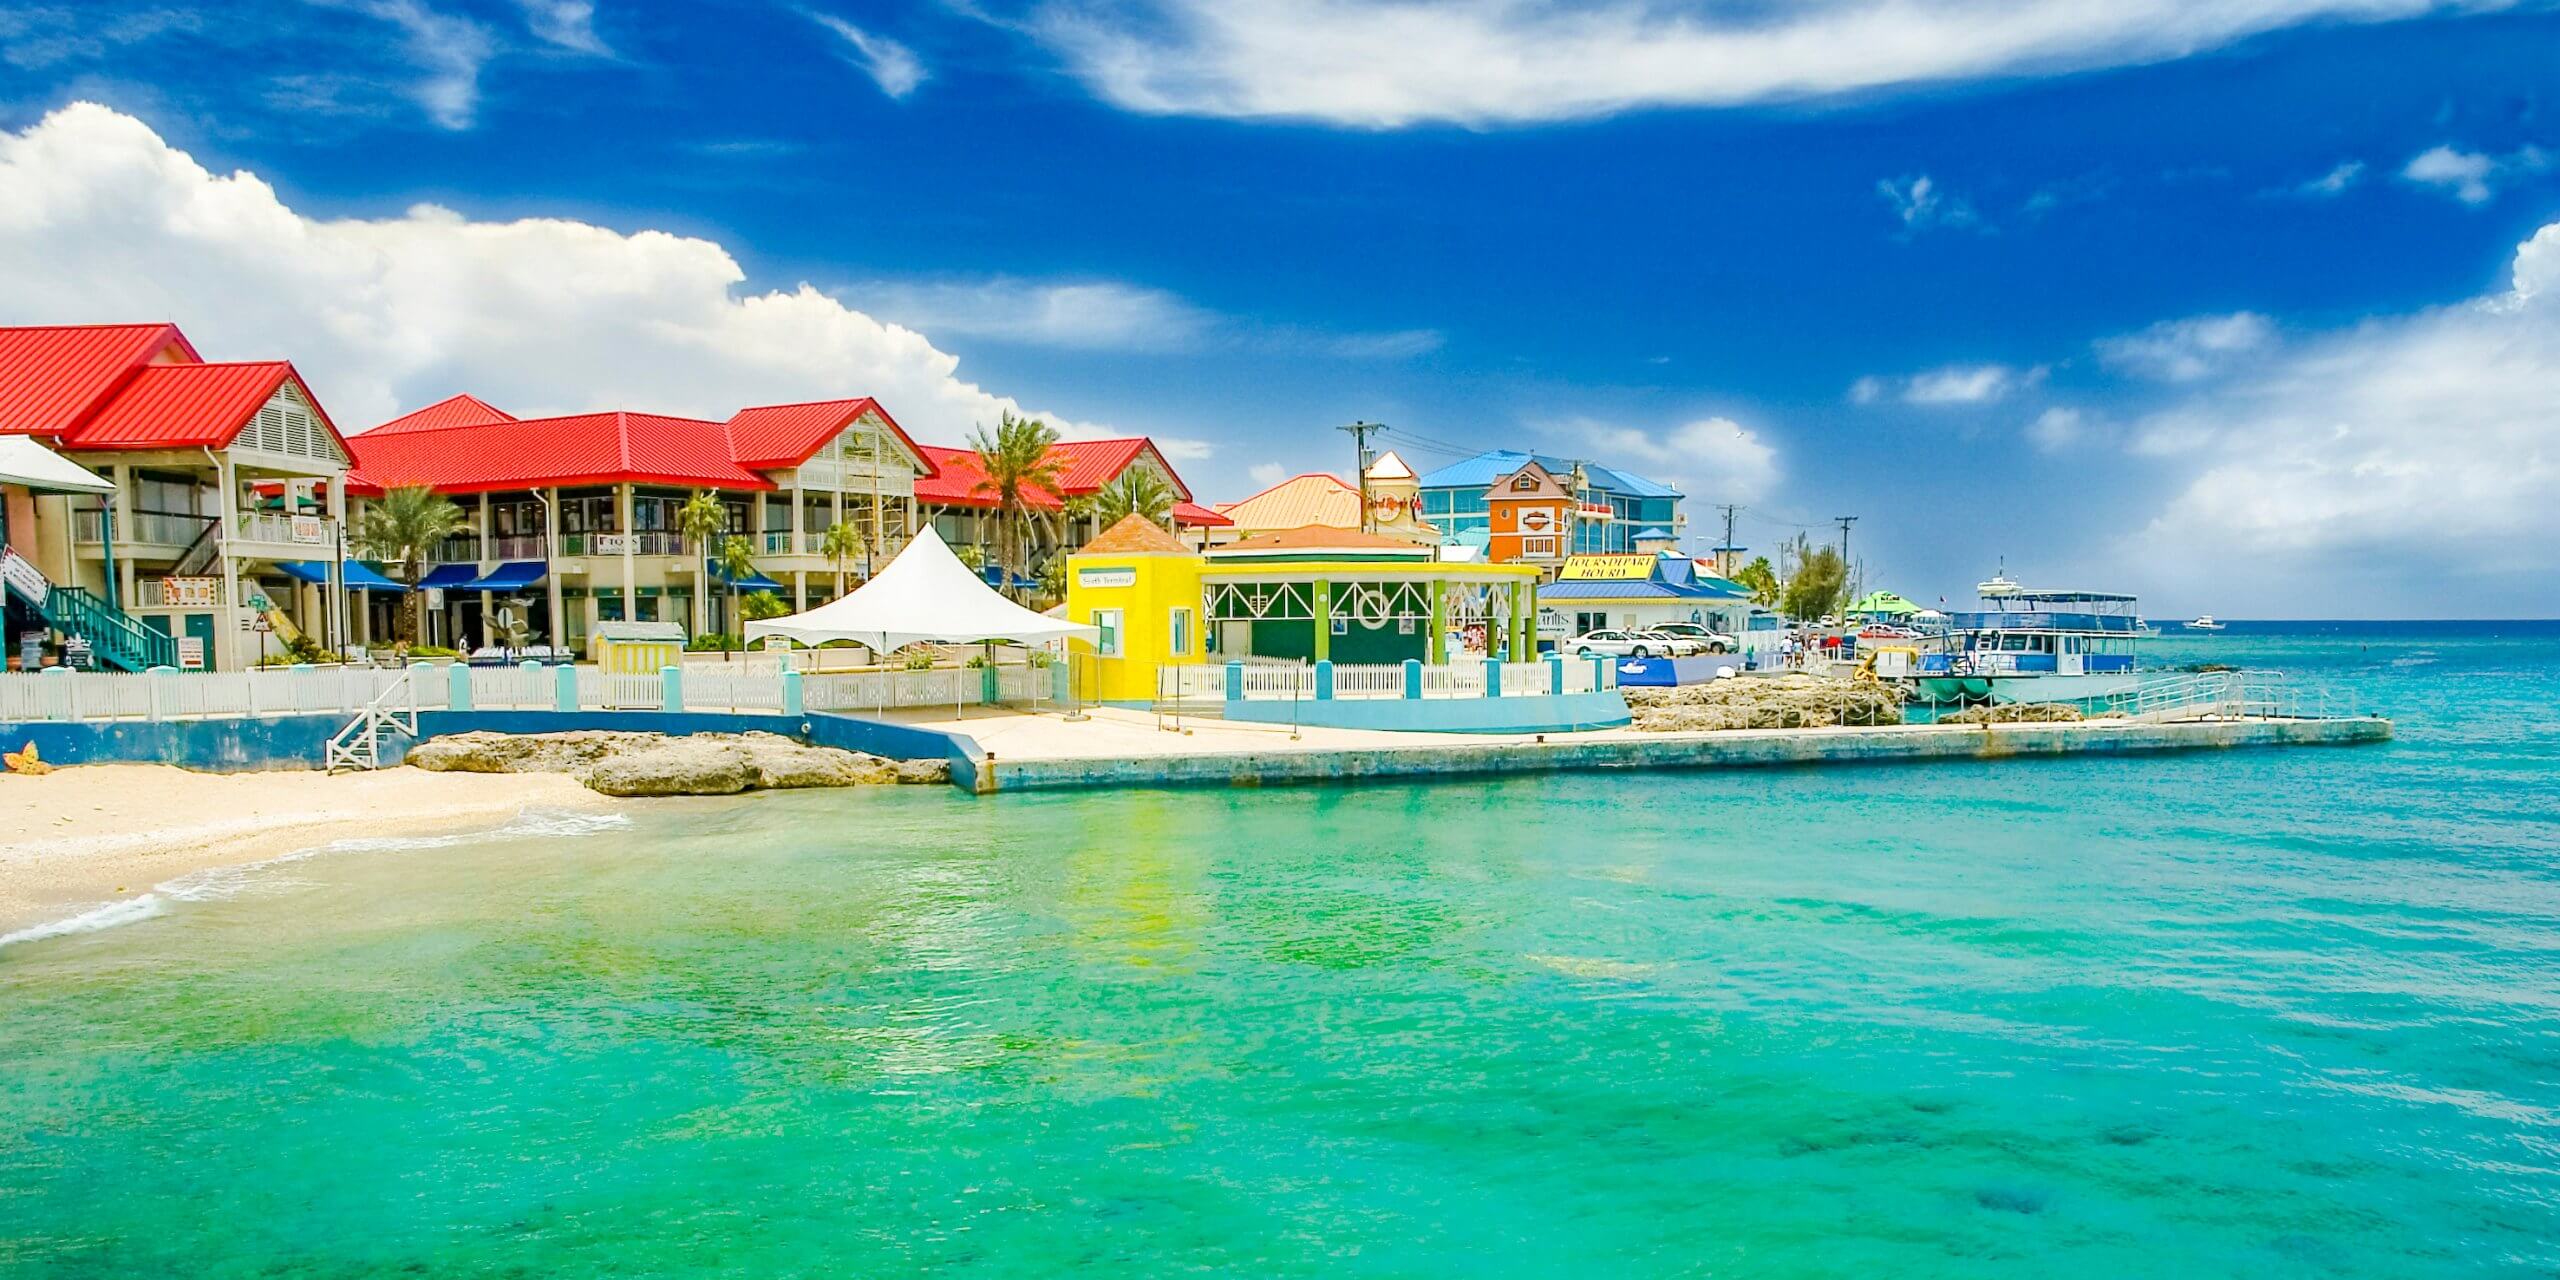 Image of Georgetown, Grand Cayman 